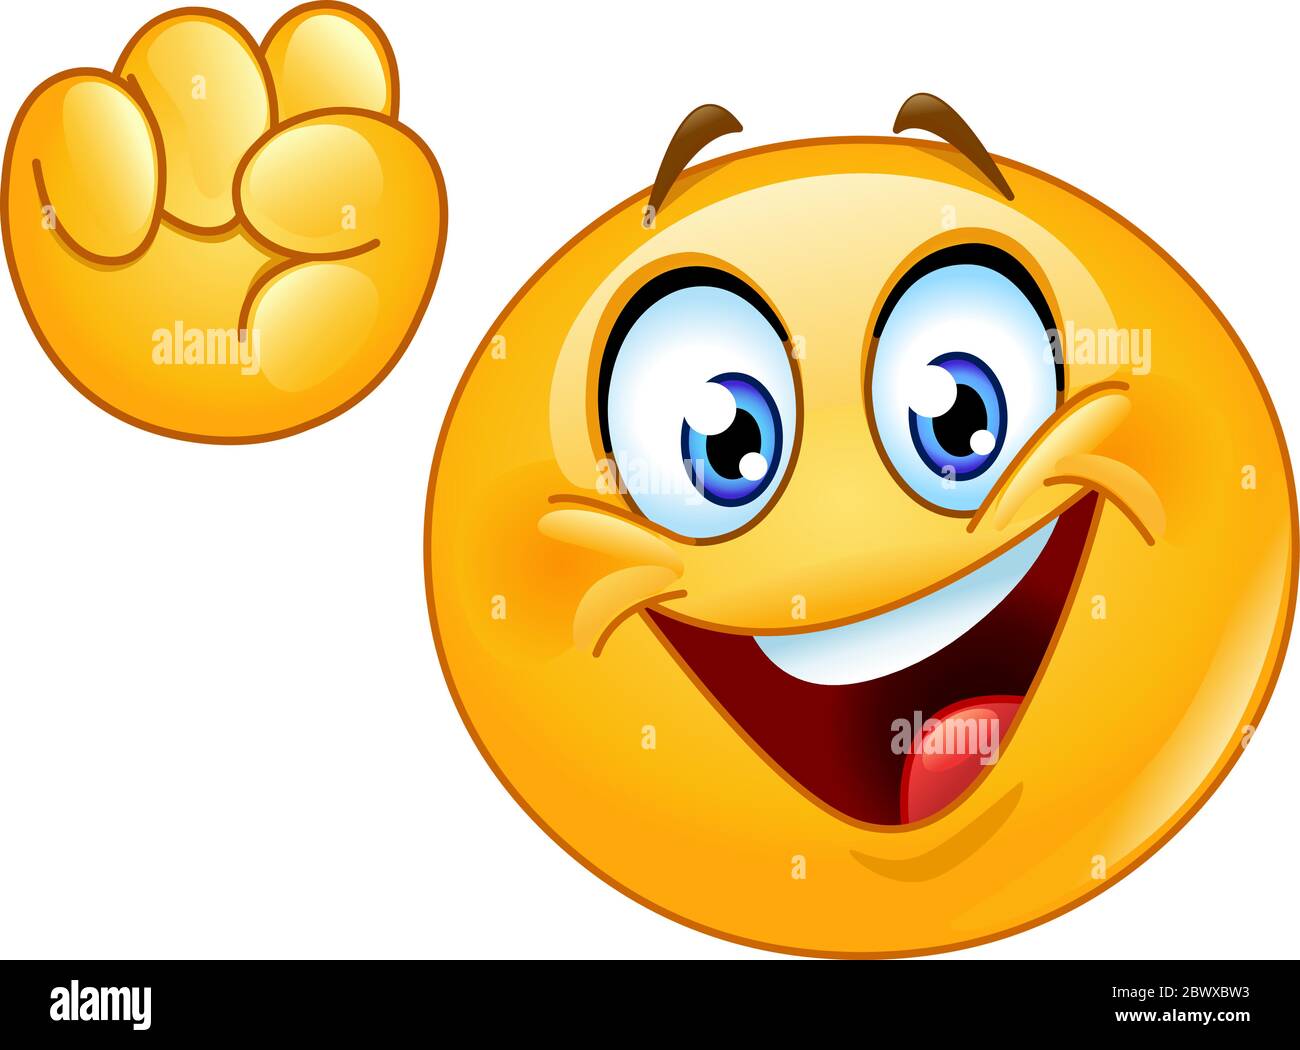 Emoticon making power to the people fist hand up gesture. Stock Vector